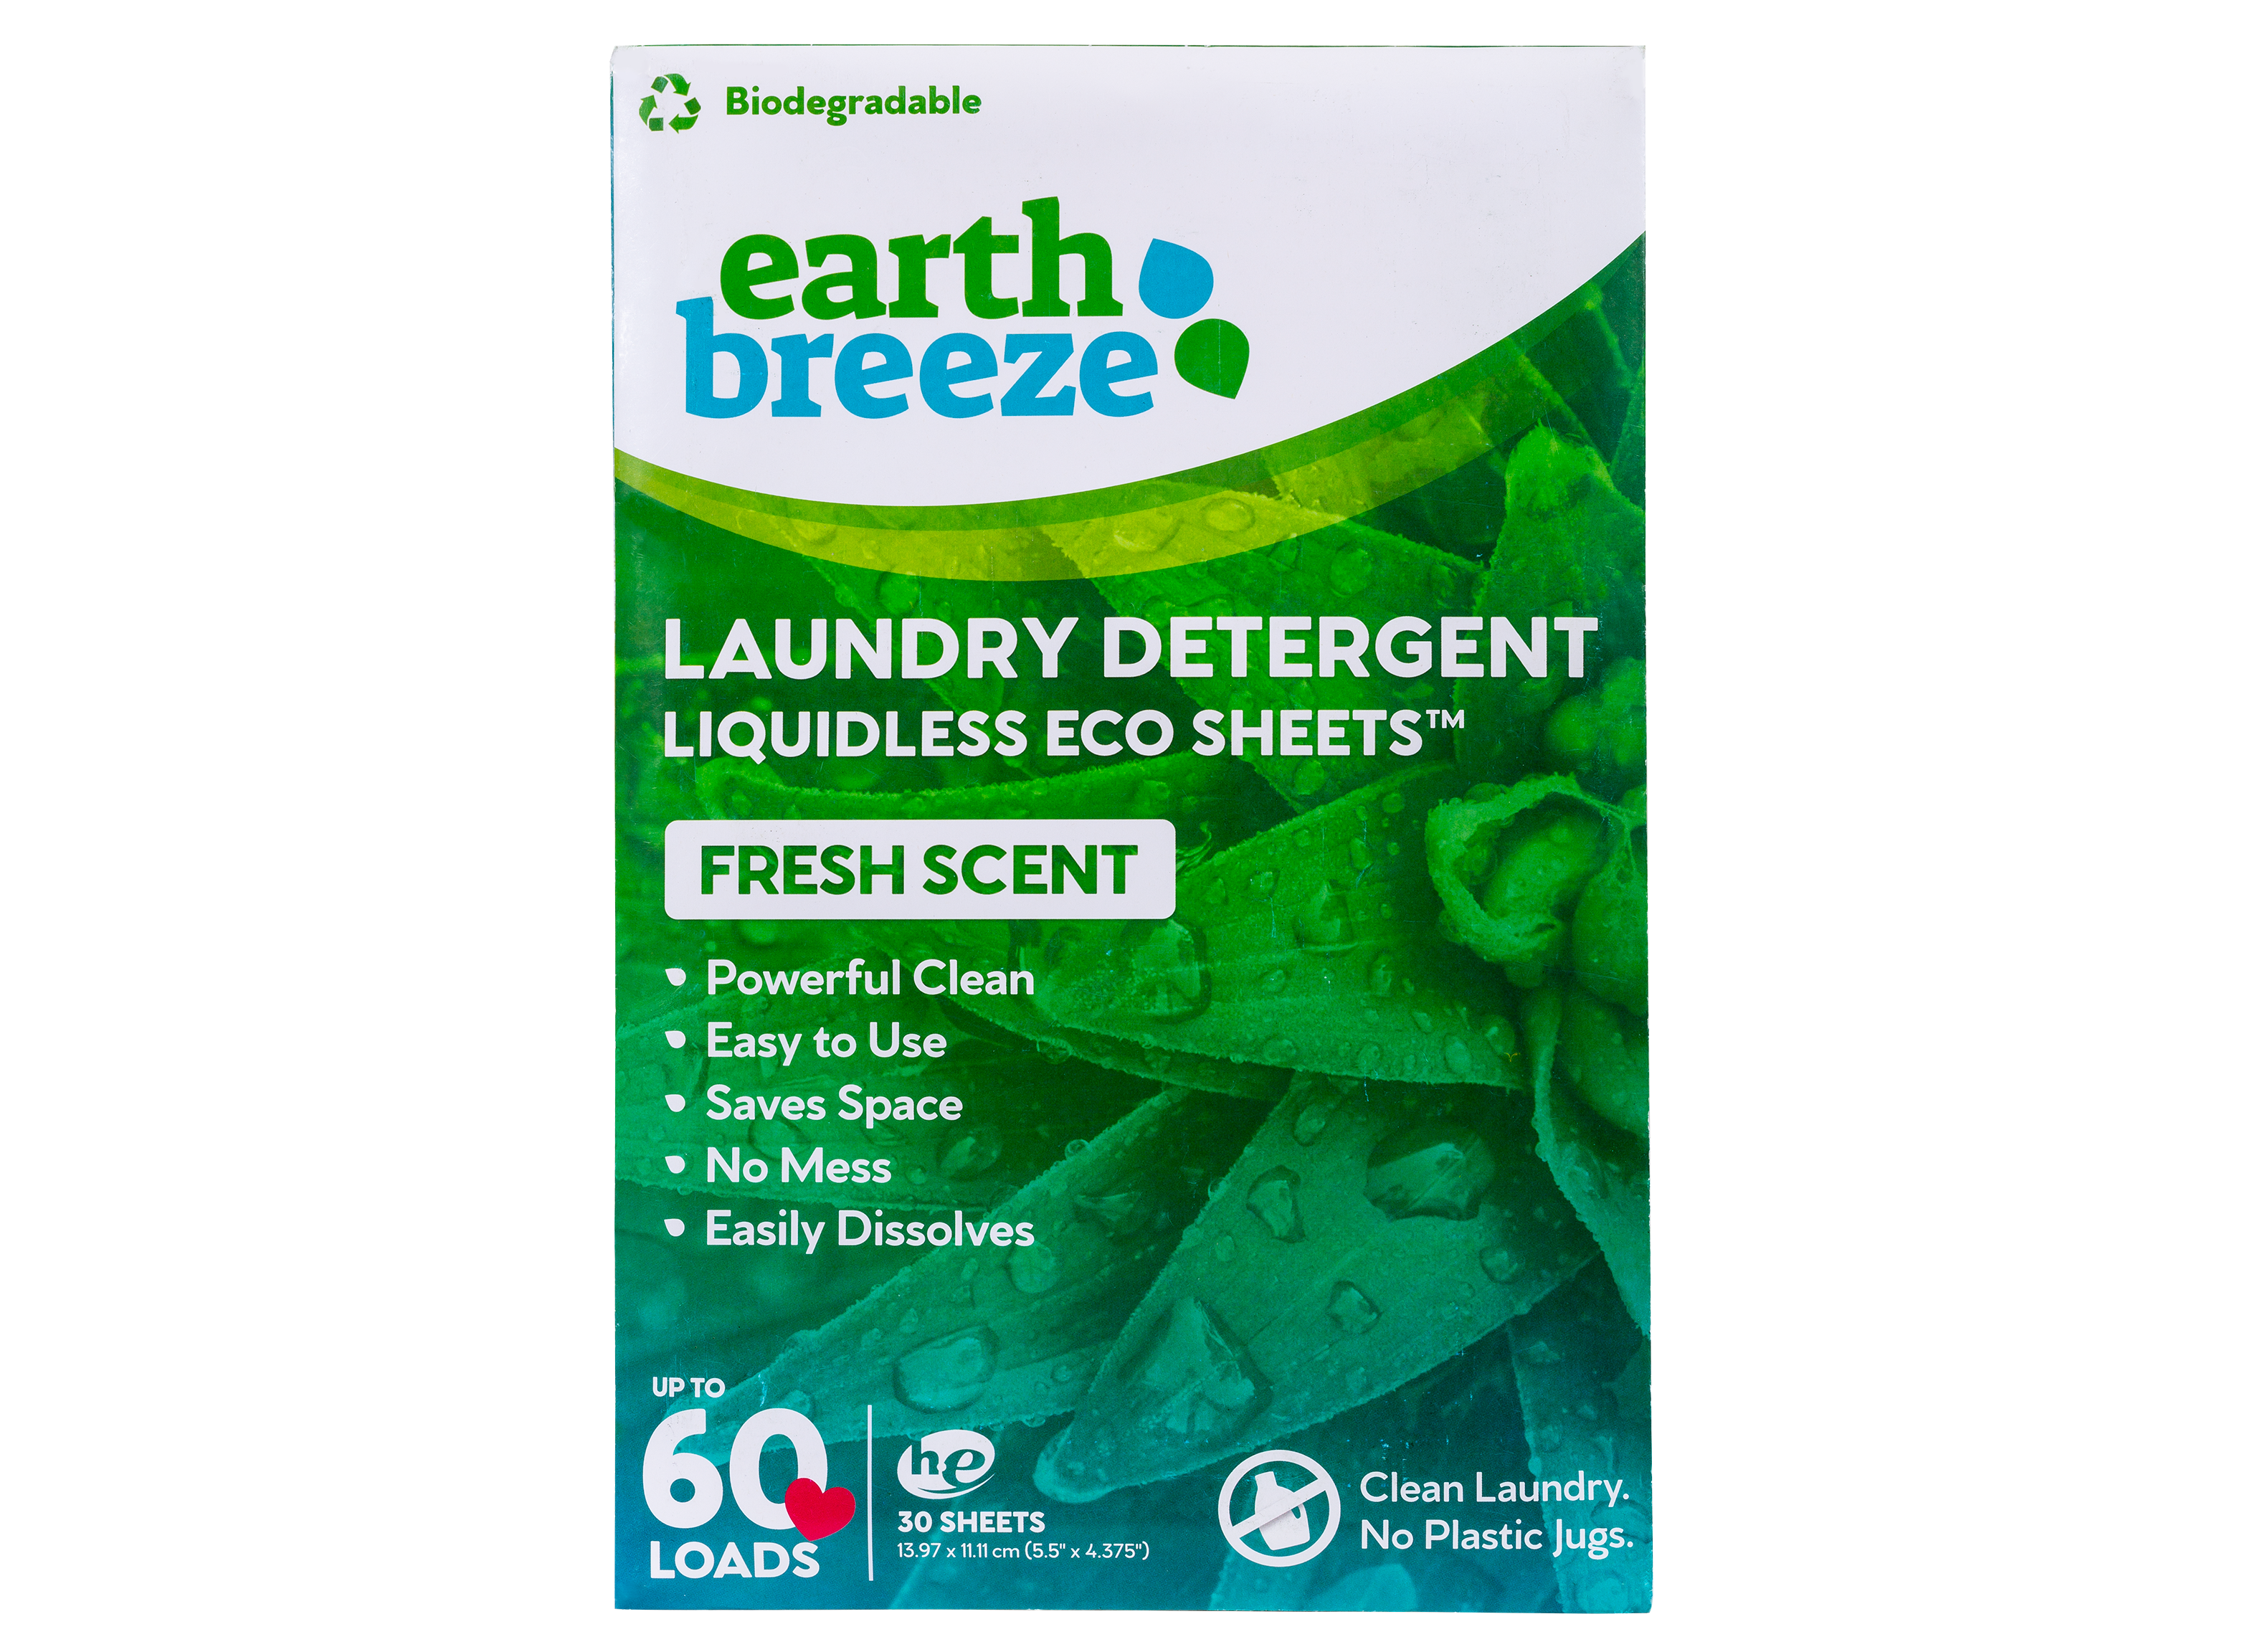 https://crdms.images.consumerreports.org/prod/products/cr/models/405800-sheets-strips-earth-breeze-liquidless-eco-sheets-10027969.png